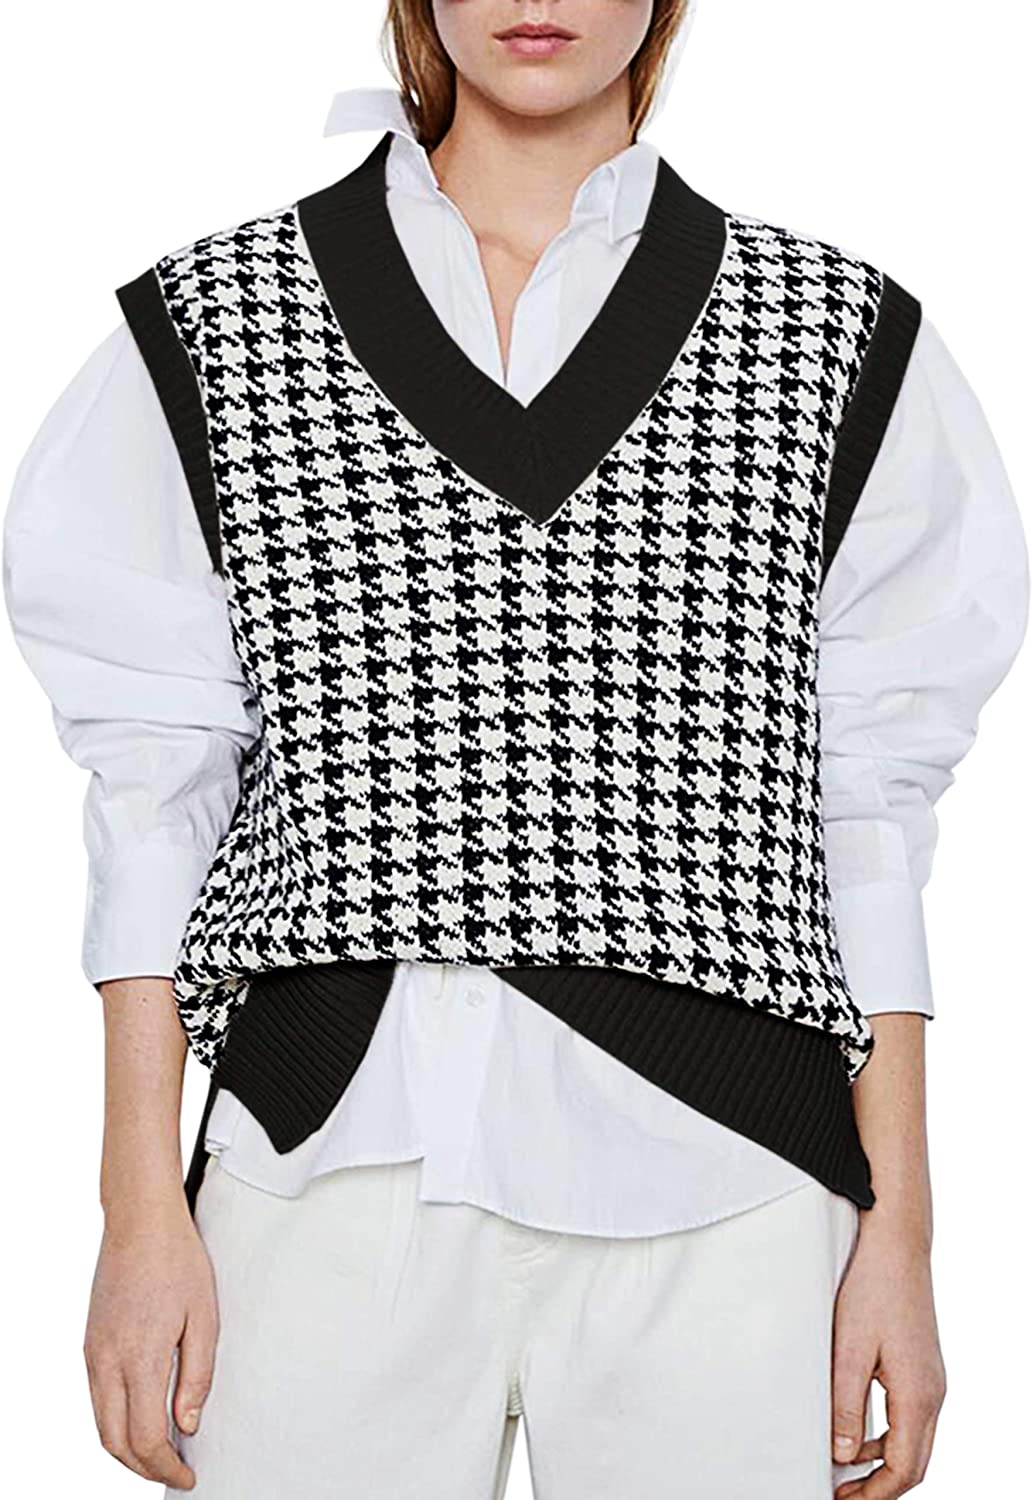 SAFRISIOR Women Casual Oversized Houndstooth Sweater Vest V Neck Geometric Knitted Tank Top Sleeveless Loose Pullover